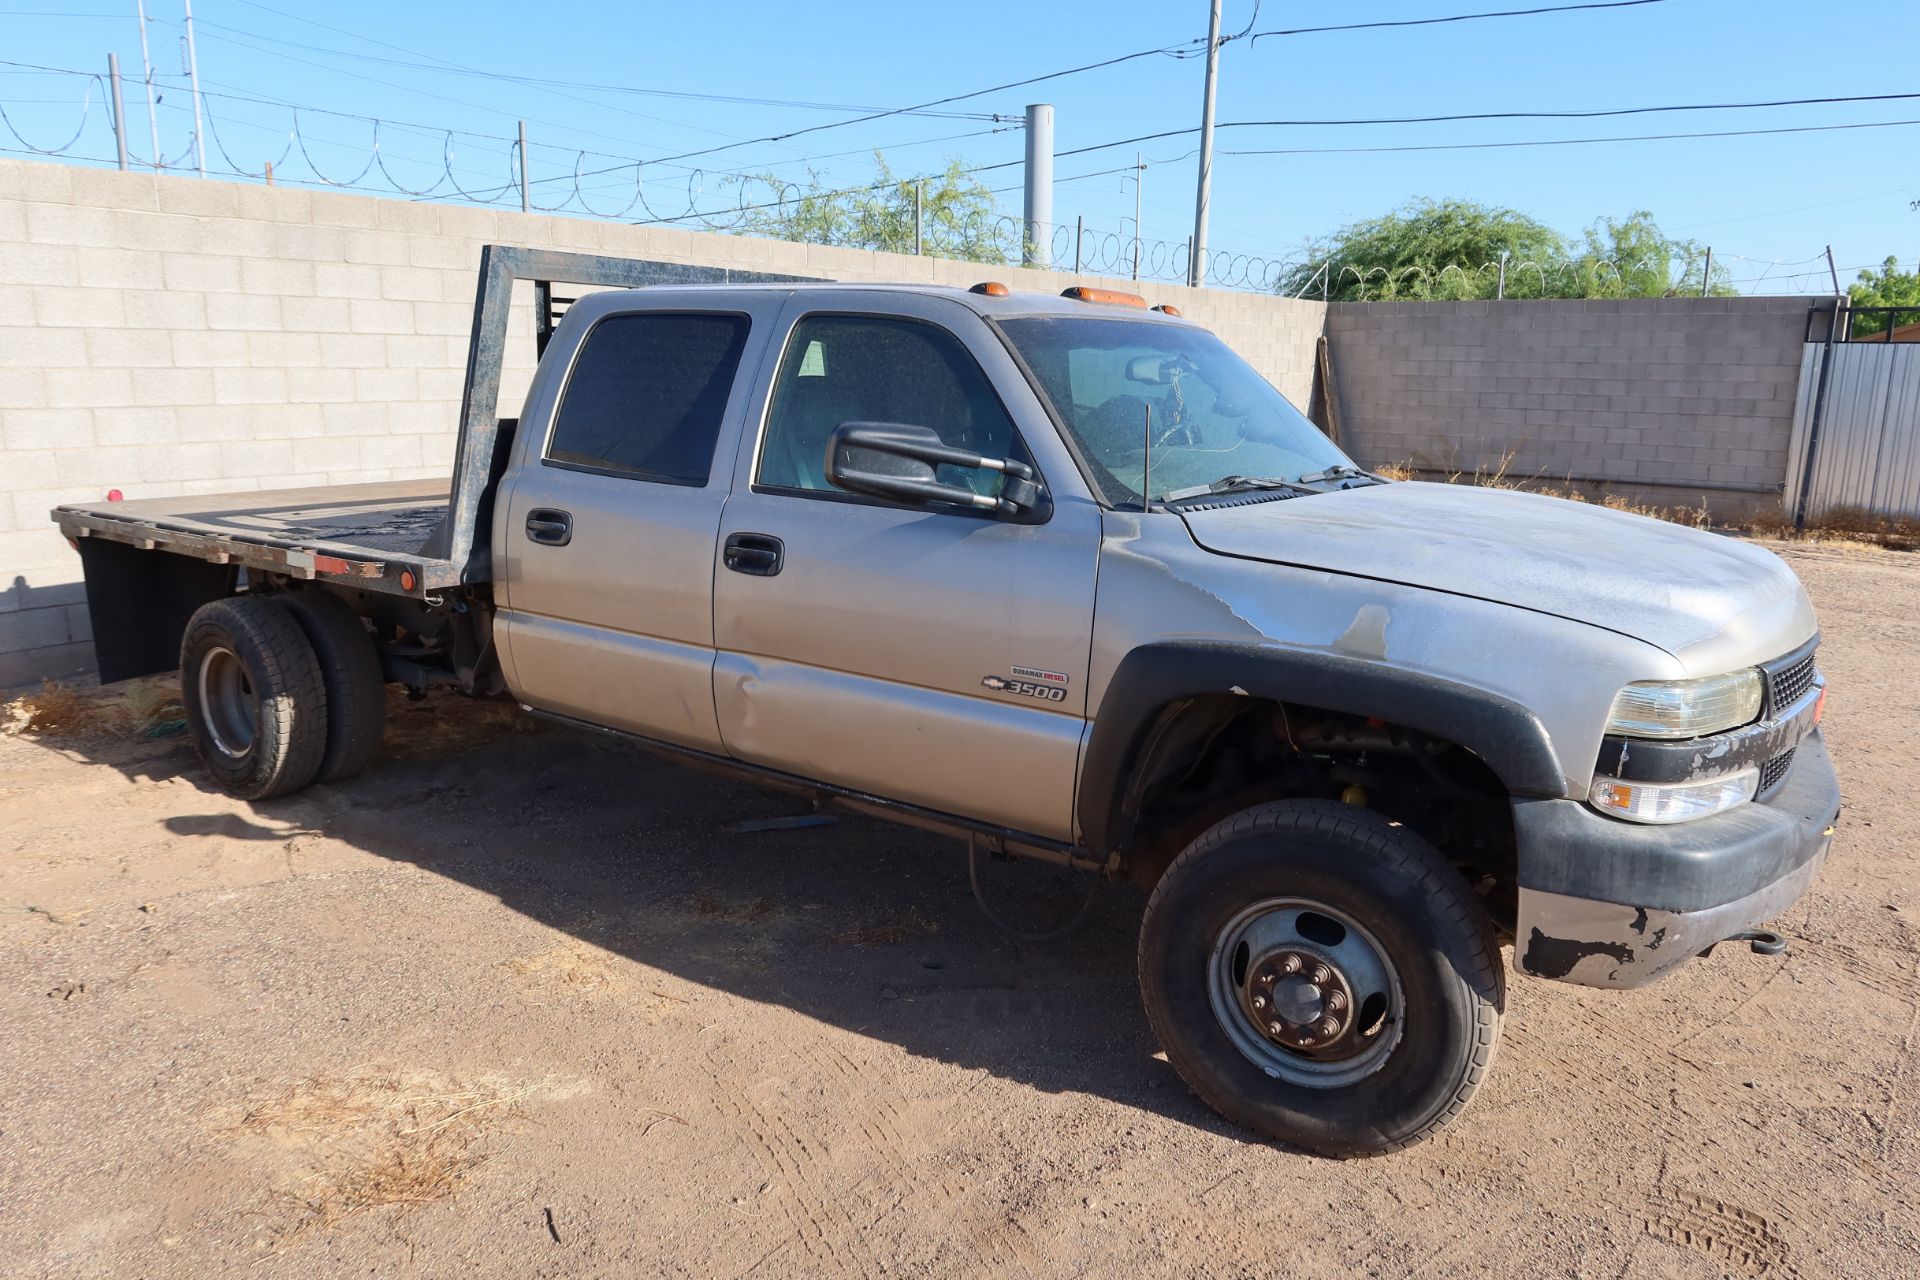 2002 CHEVROLET 3500 LT HD DIESEL 9' FLATBED, CREW CAB, TRUCK LOOKS LIKE HELL, BUT RUNS GREAT. 30290